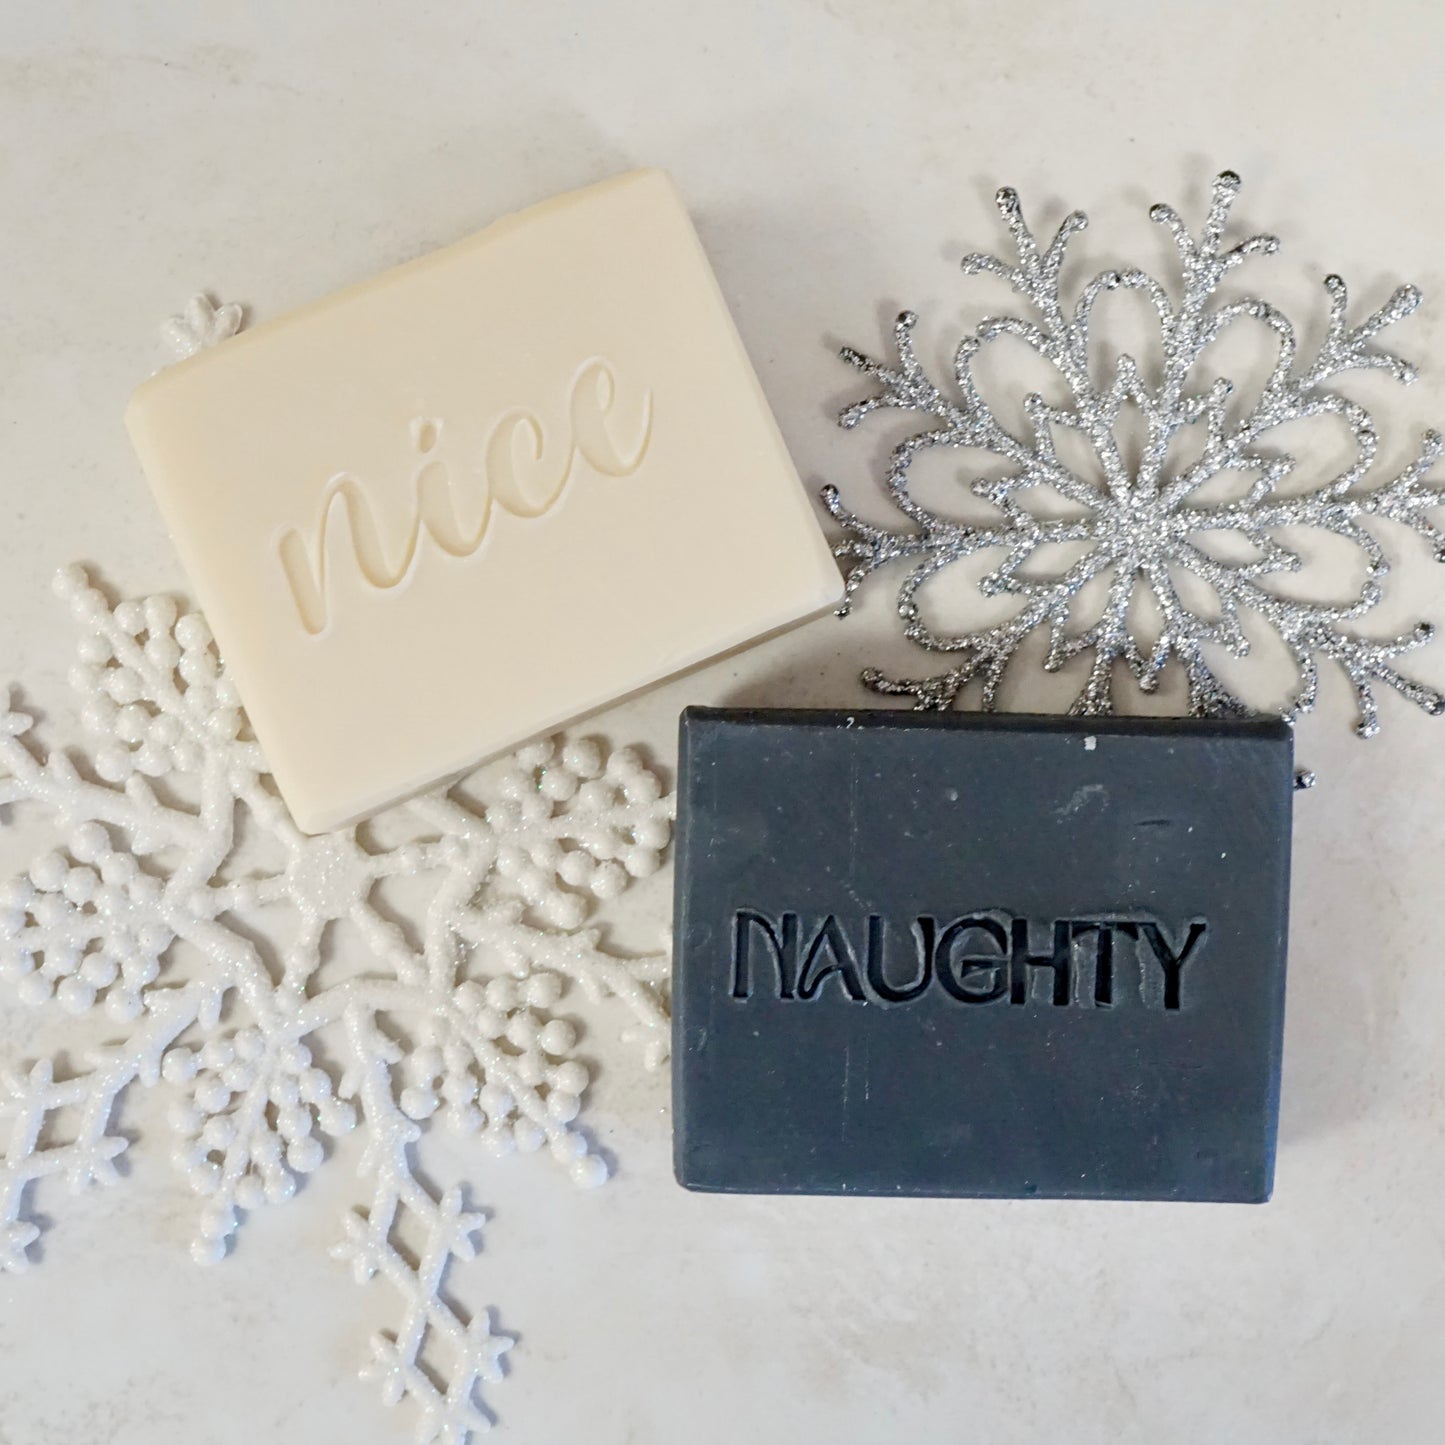 Naughty or Nice? Which are you? Find out! Cold Process Soap Cranberry Cocktail Scent